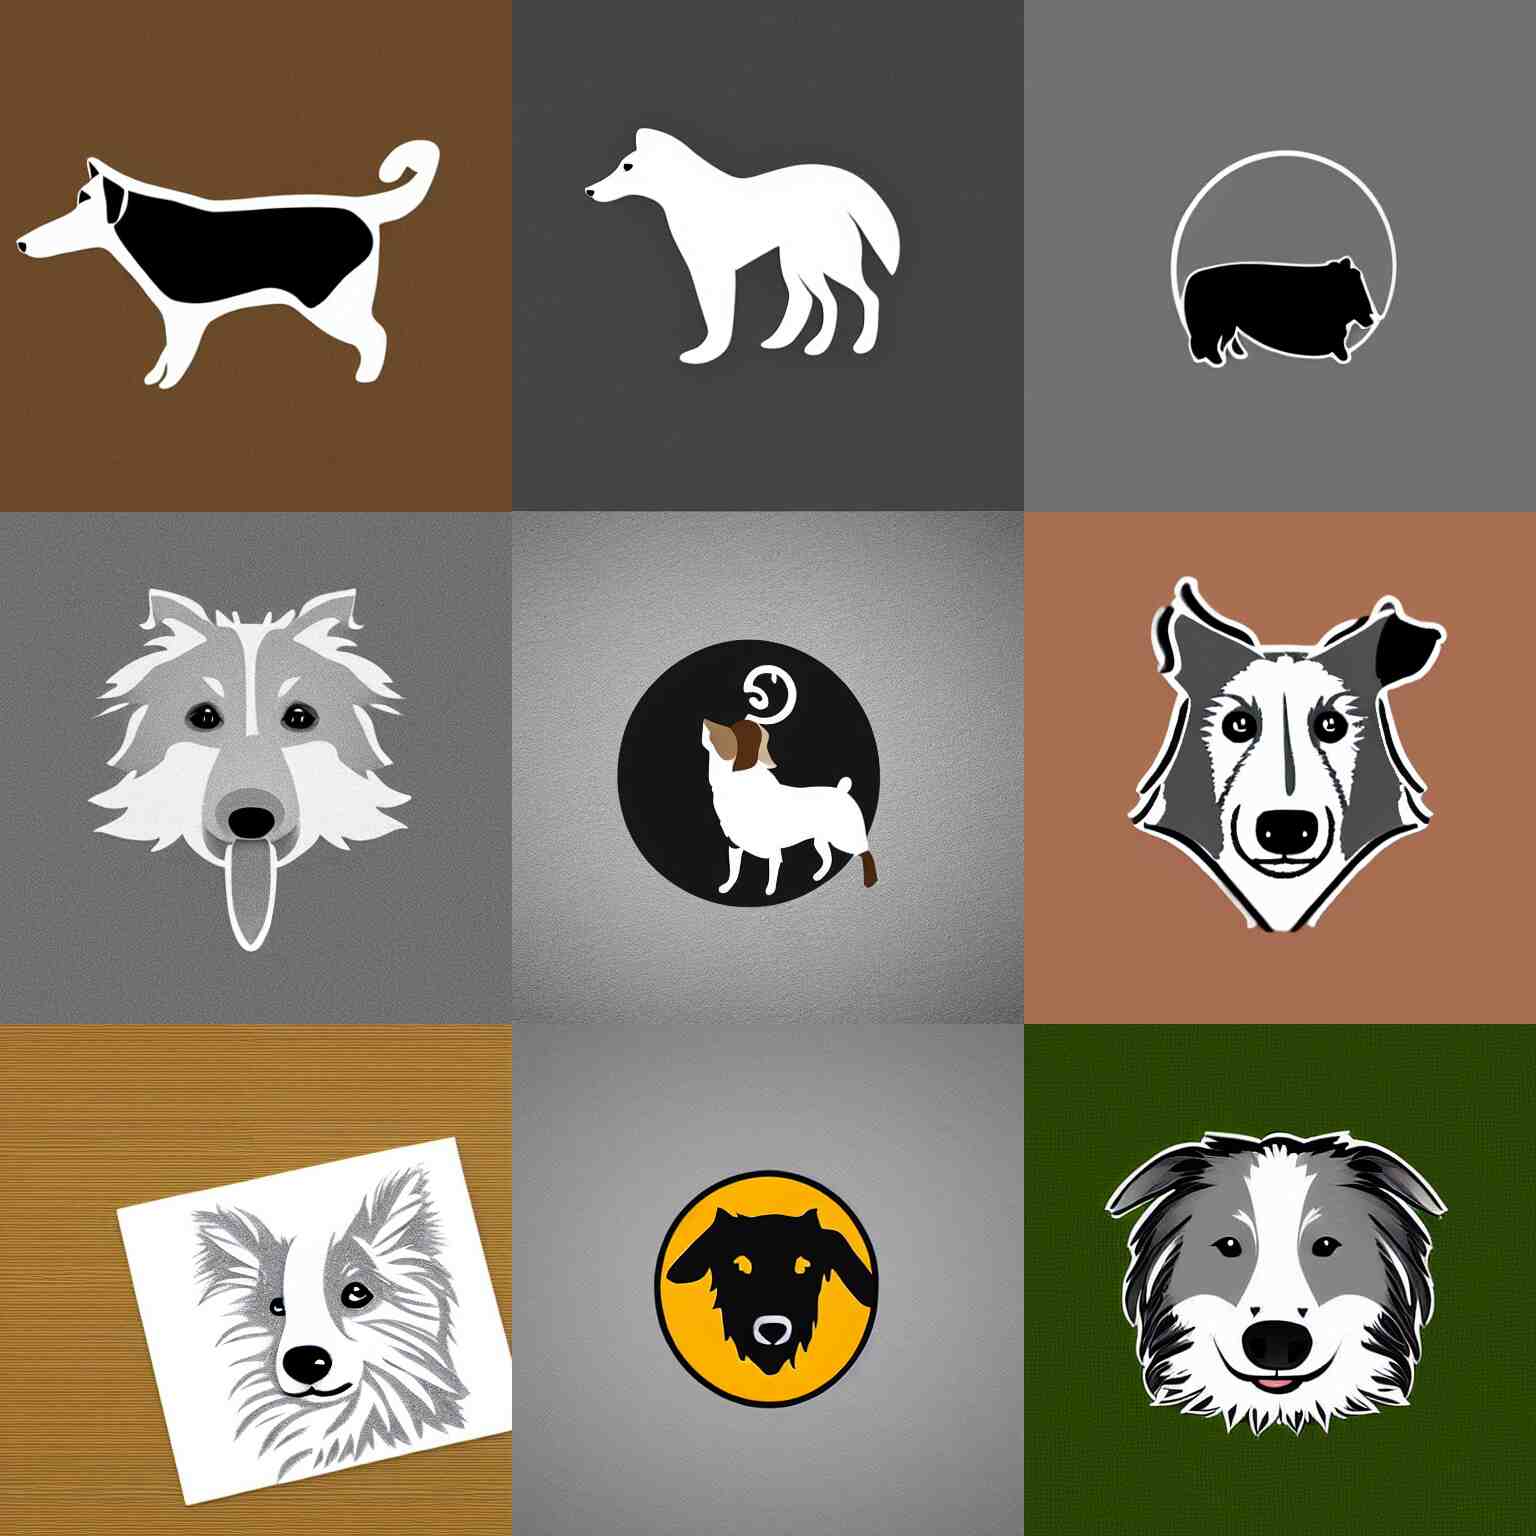 Use This API To Simplify Your Dog Breeding Process